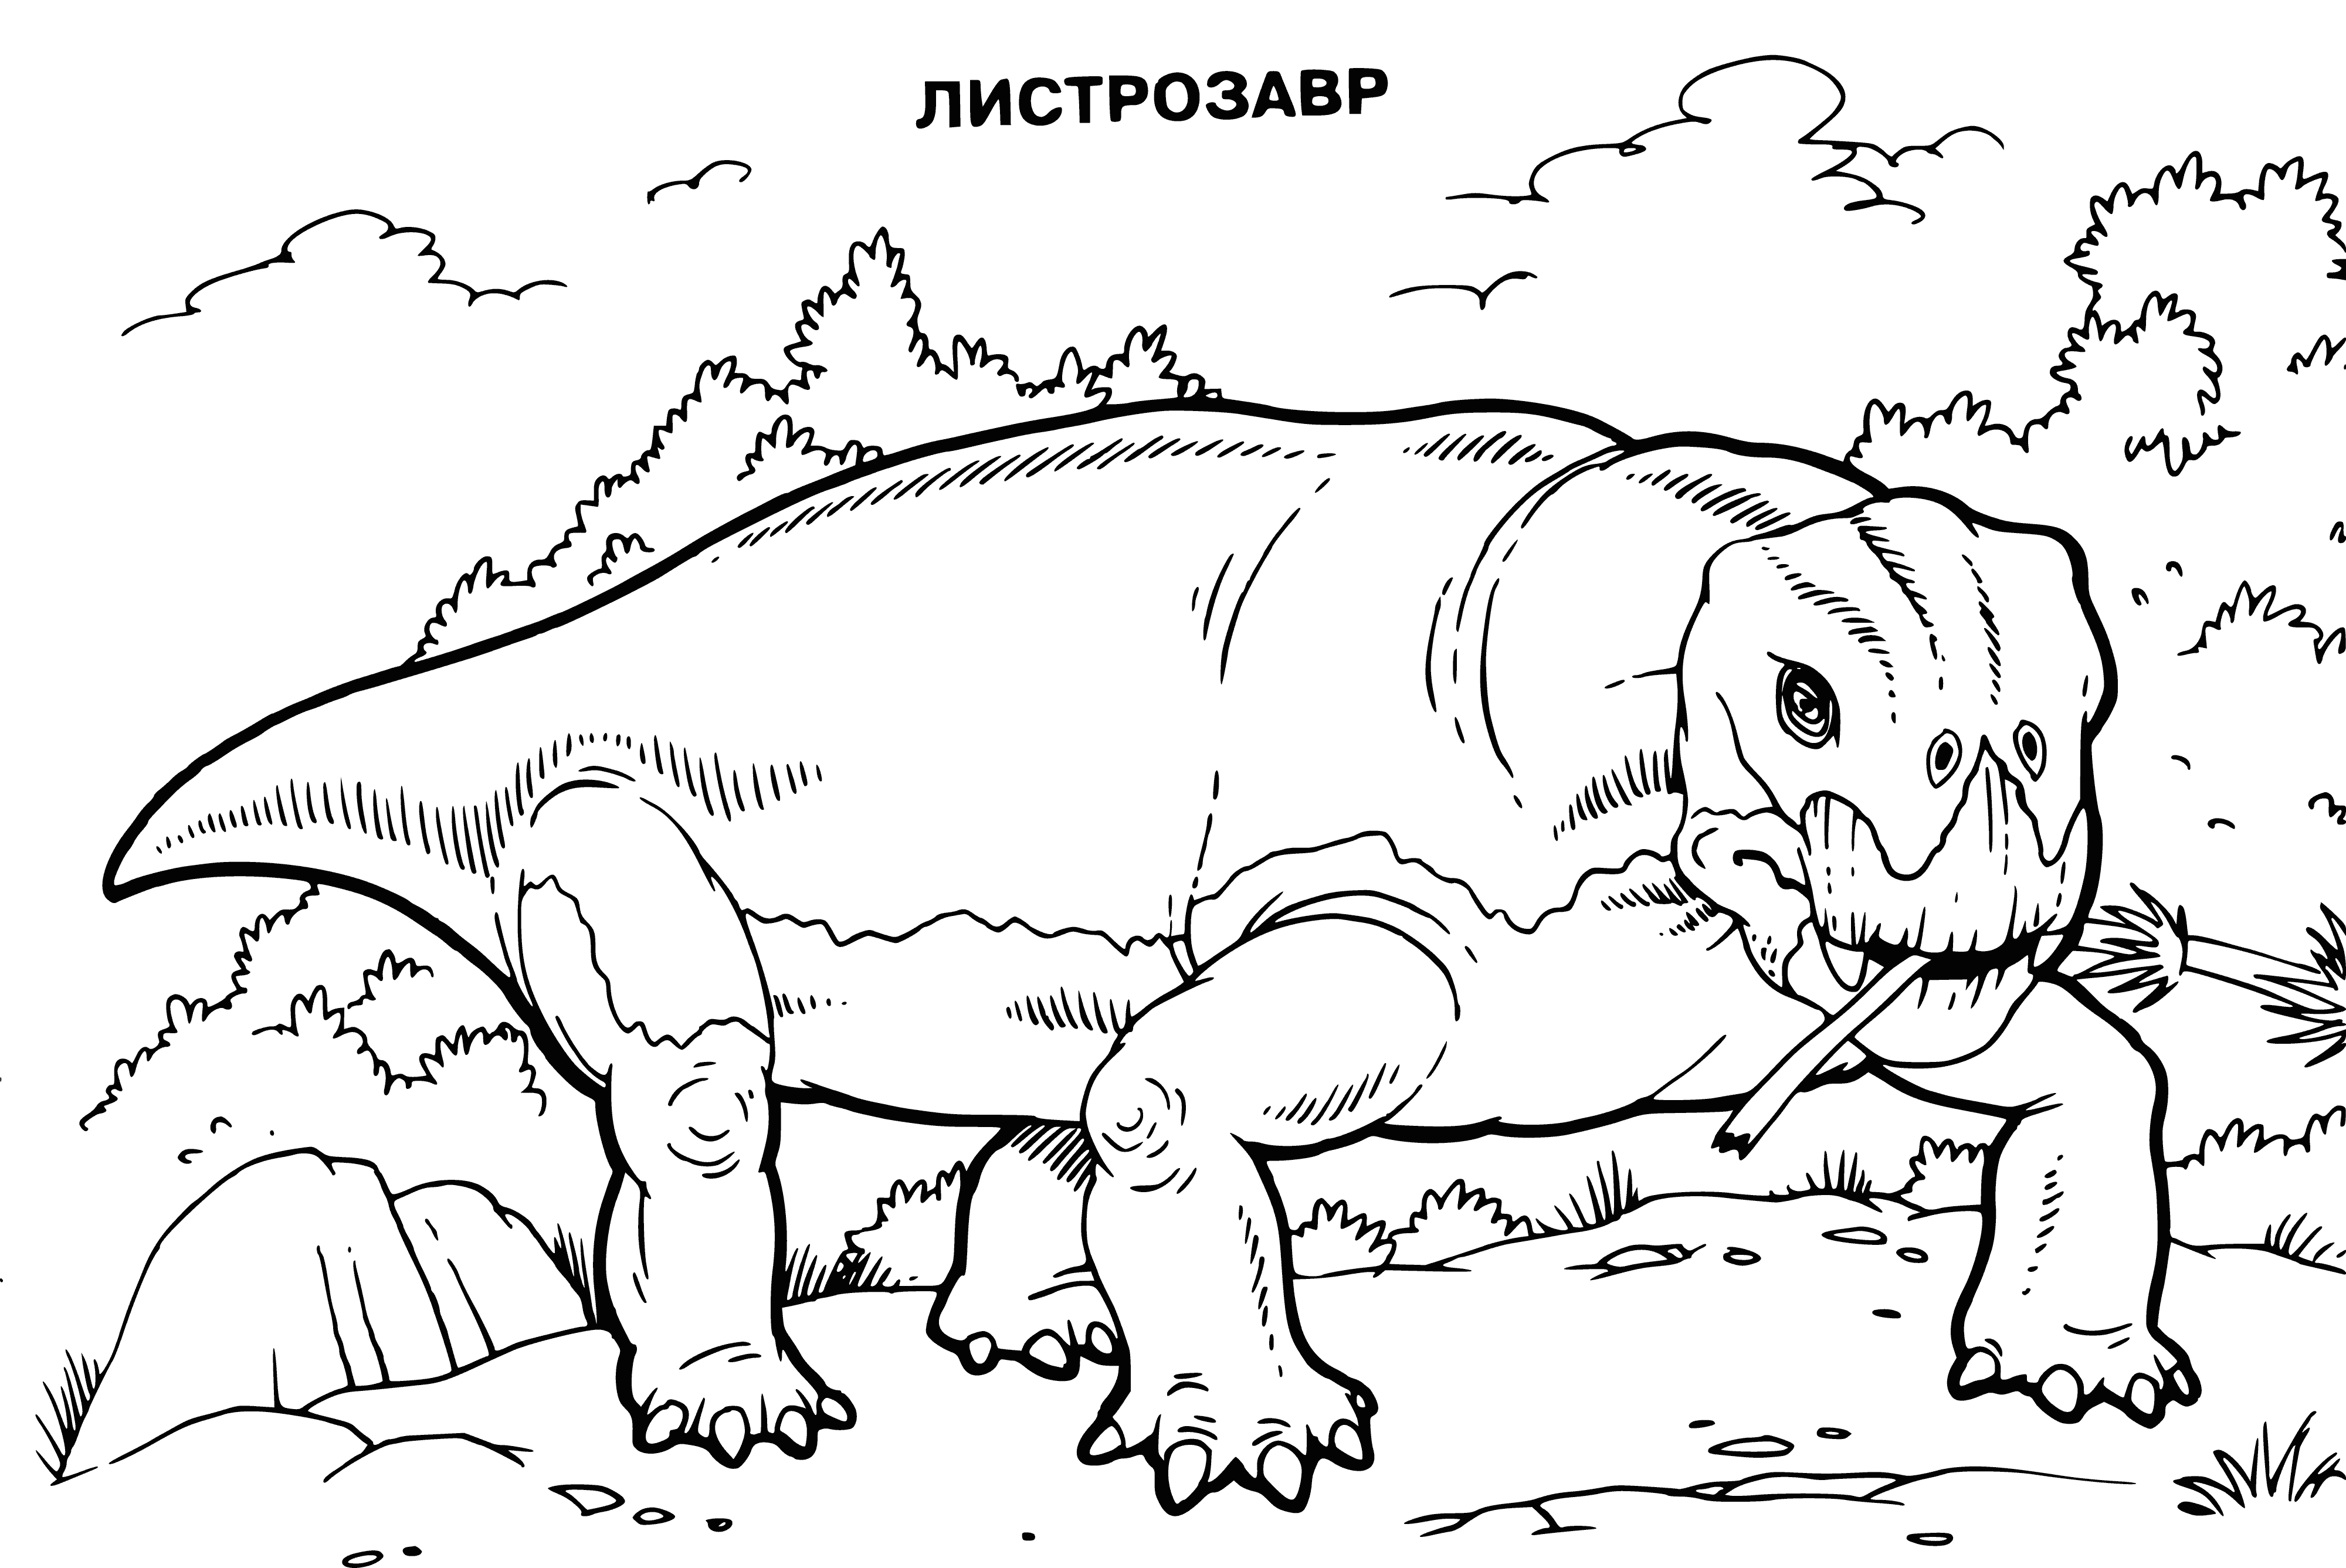 coloring page: Large, green dinosaur with long neck, small head, sharp teeth, spike-covered body, long, thin tail, & 4 short legs.